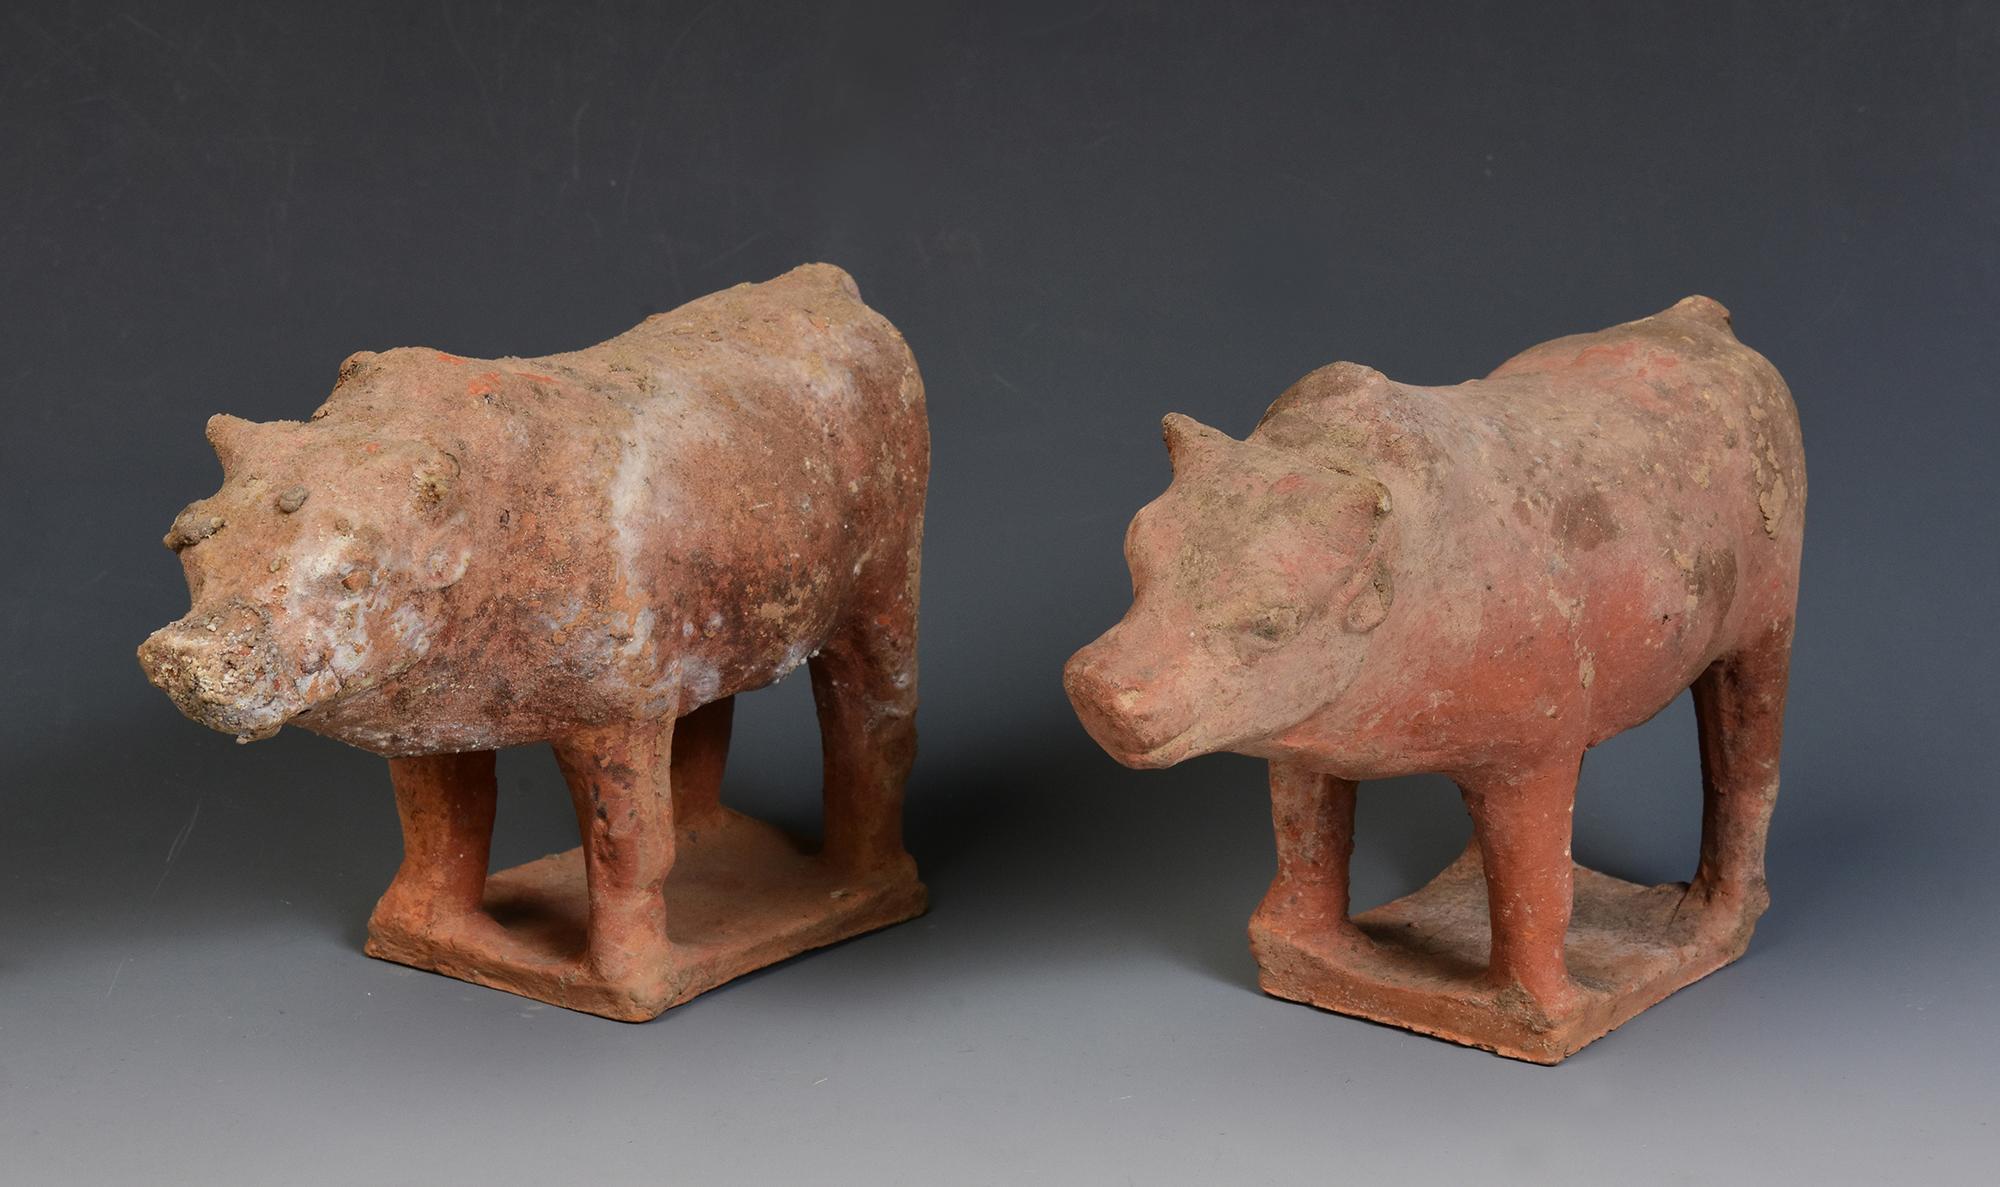 A pair of antique Chinese pottery standing cow.

Age: China, Tang Dynasty, A.D. 618 - 907
Size: Length 15.8 - 16 C.M. / Width 6.5 - 6.7 C.M. / Height 10.5 - 10.8 C.M.
Condition: Well-preserved old burial condition overall with some amount of soil